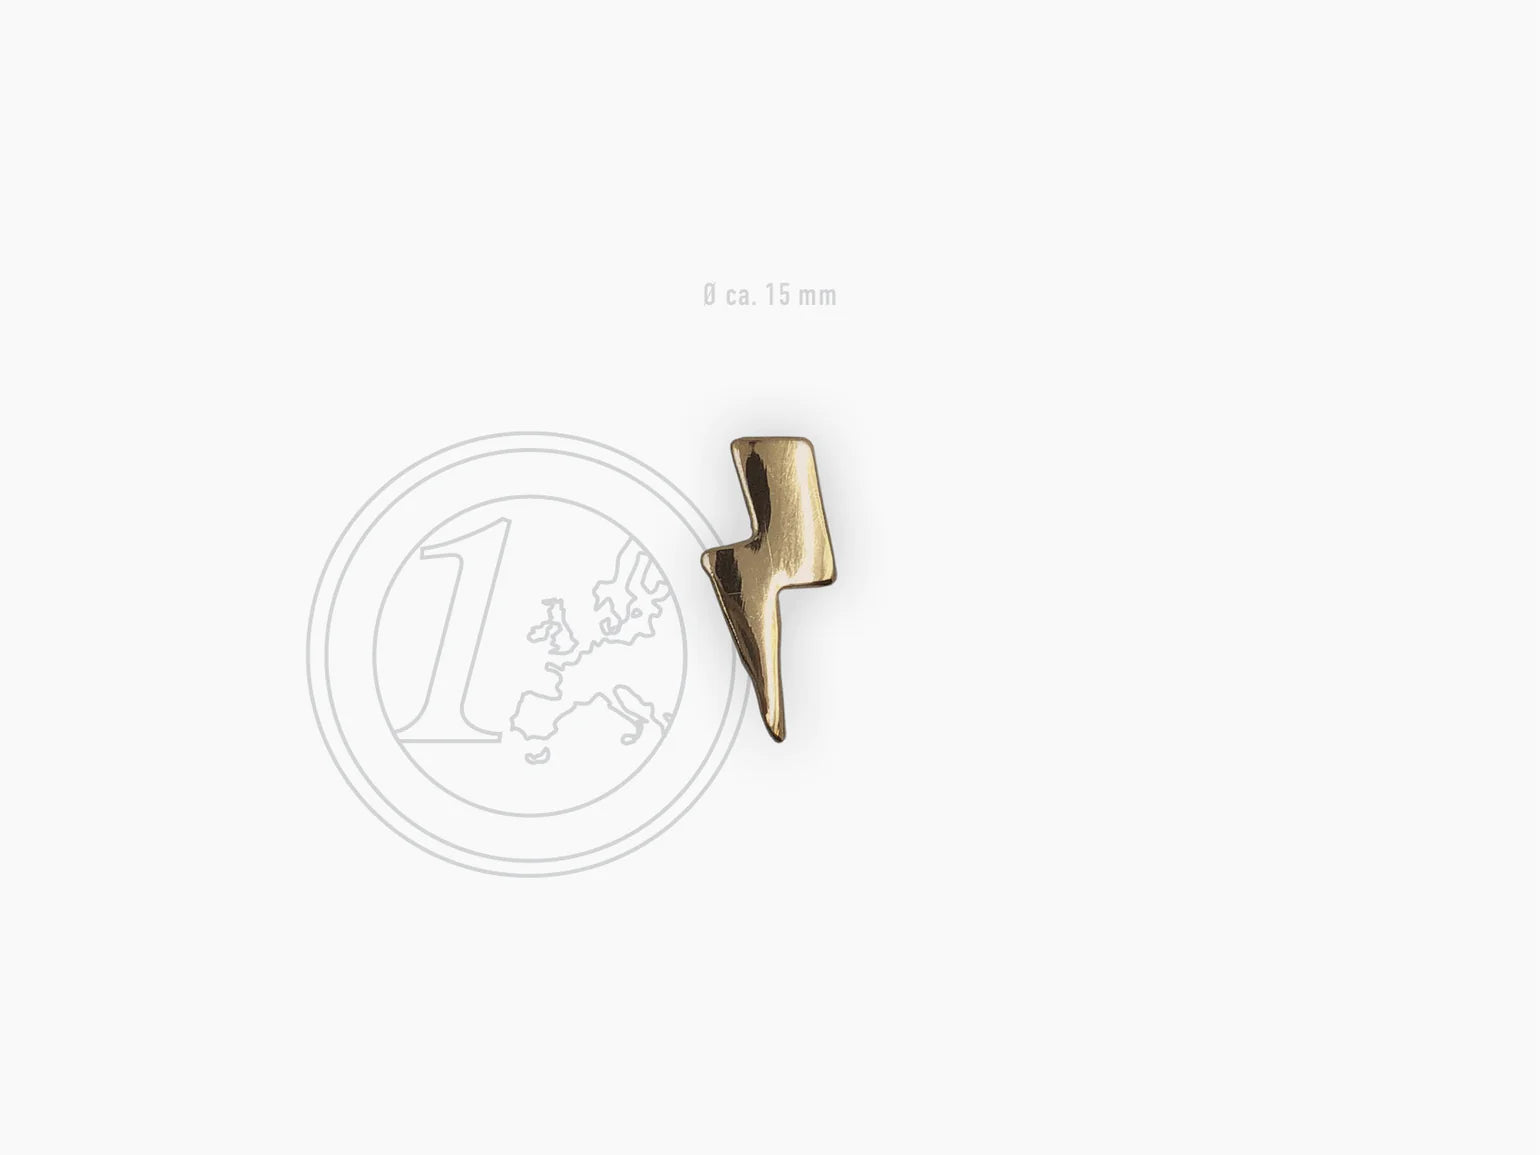 gold plated handmade lightning bolt pin by Typealive, size comparison with euro coin